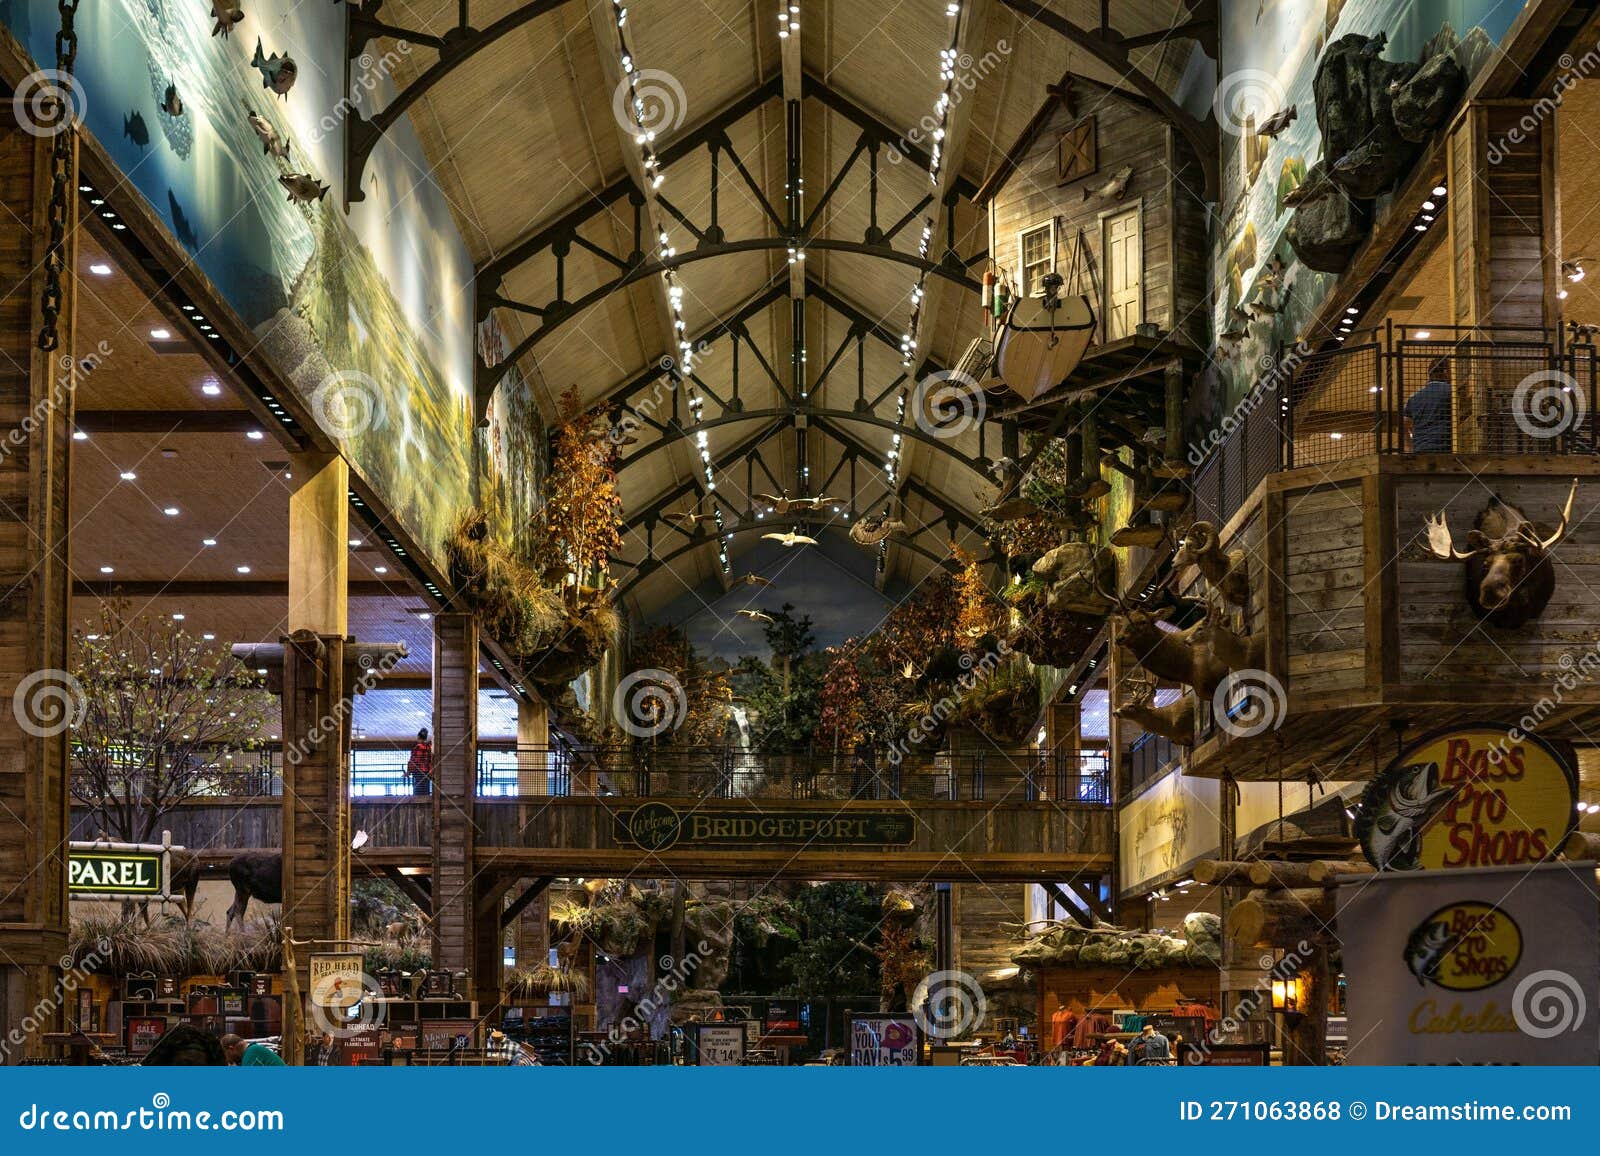 Interior of Bass Pro Shops, a Chain Known for Outdoor, Hunting and Fishing  Gear Editorial Stock Photo - Image of architecture, corporation: 271063868